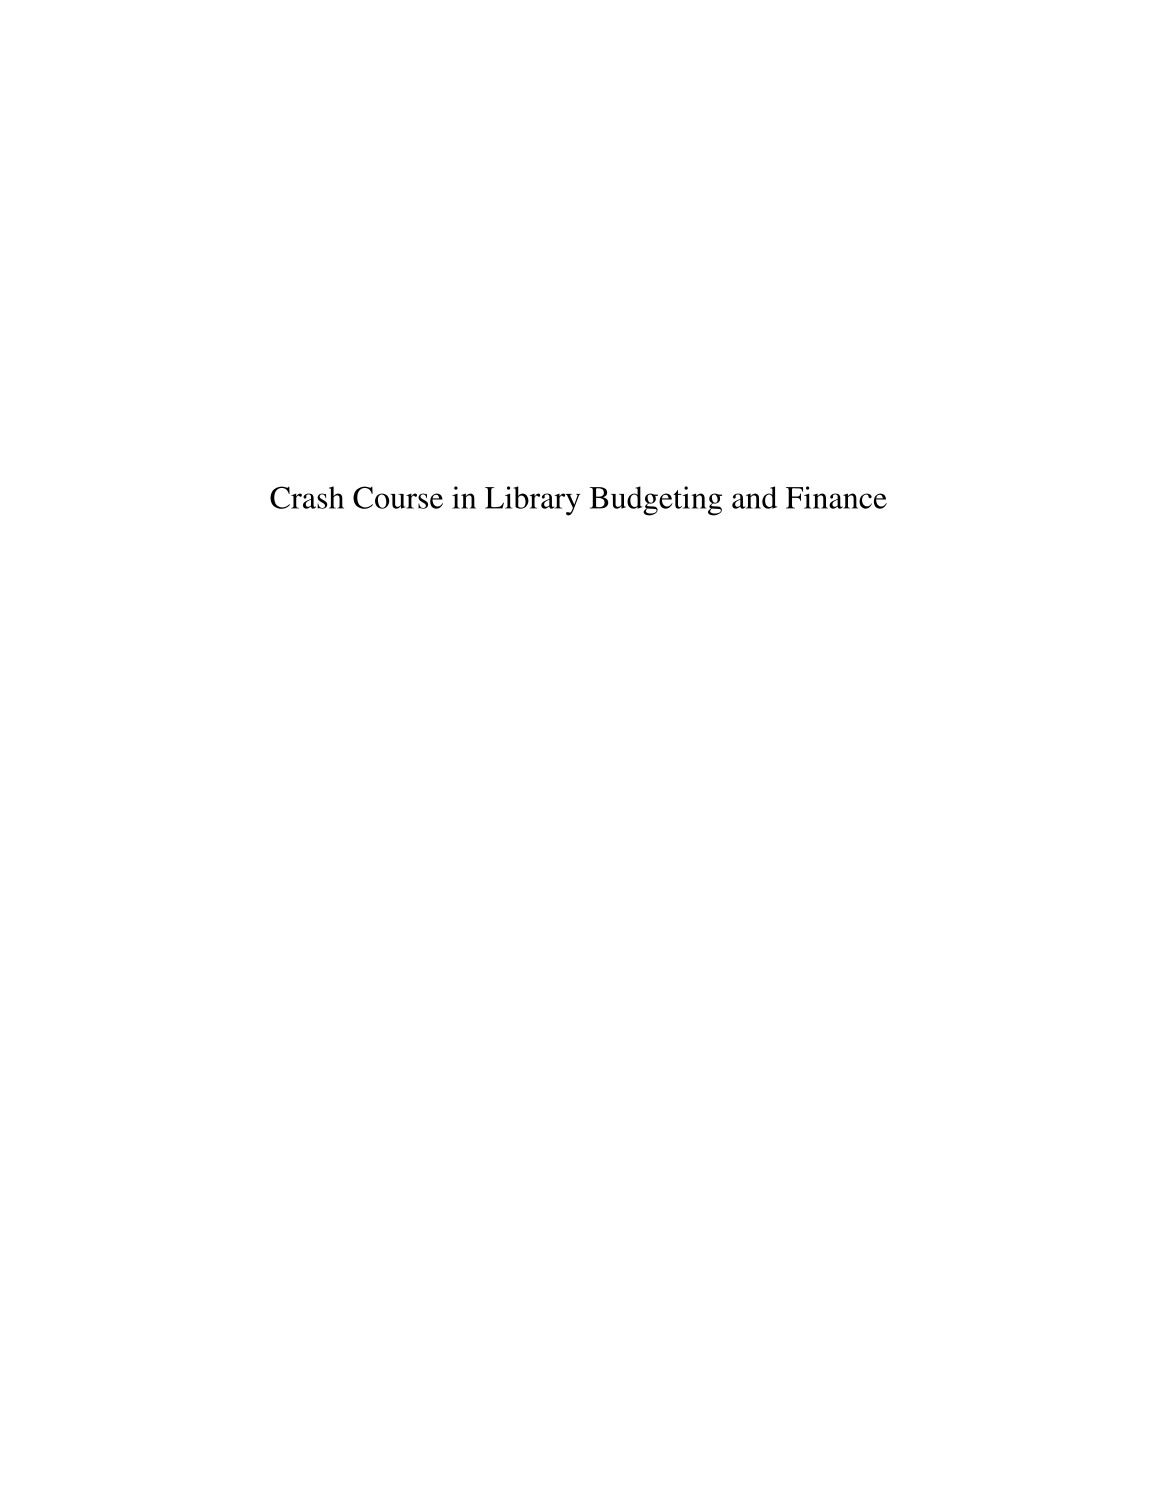 Crash Course in Library Budgeting and Finance page i1